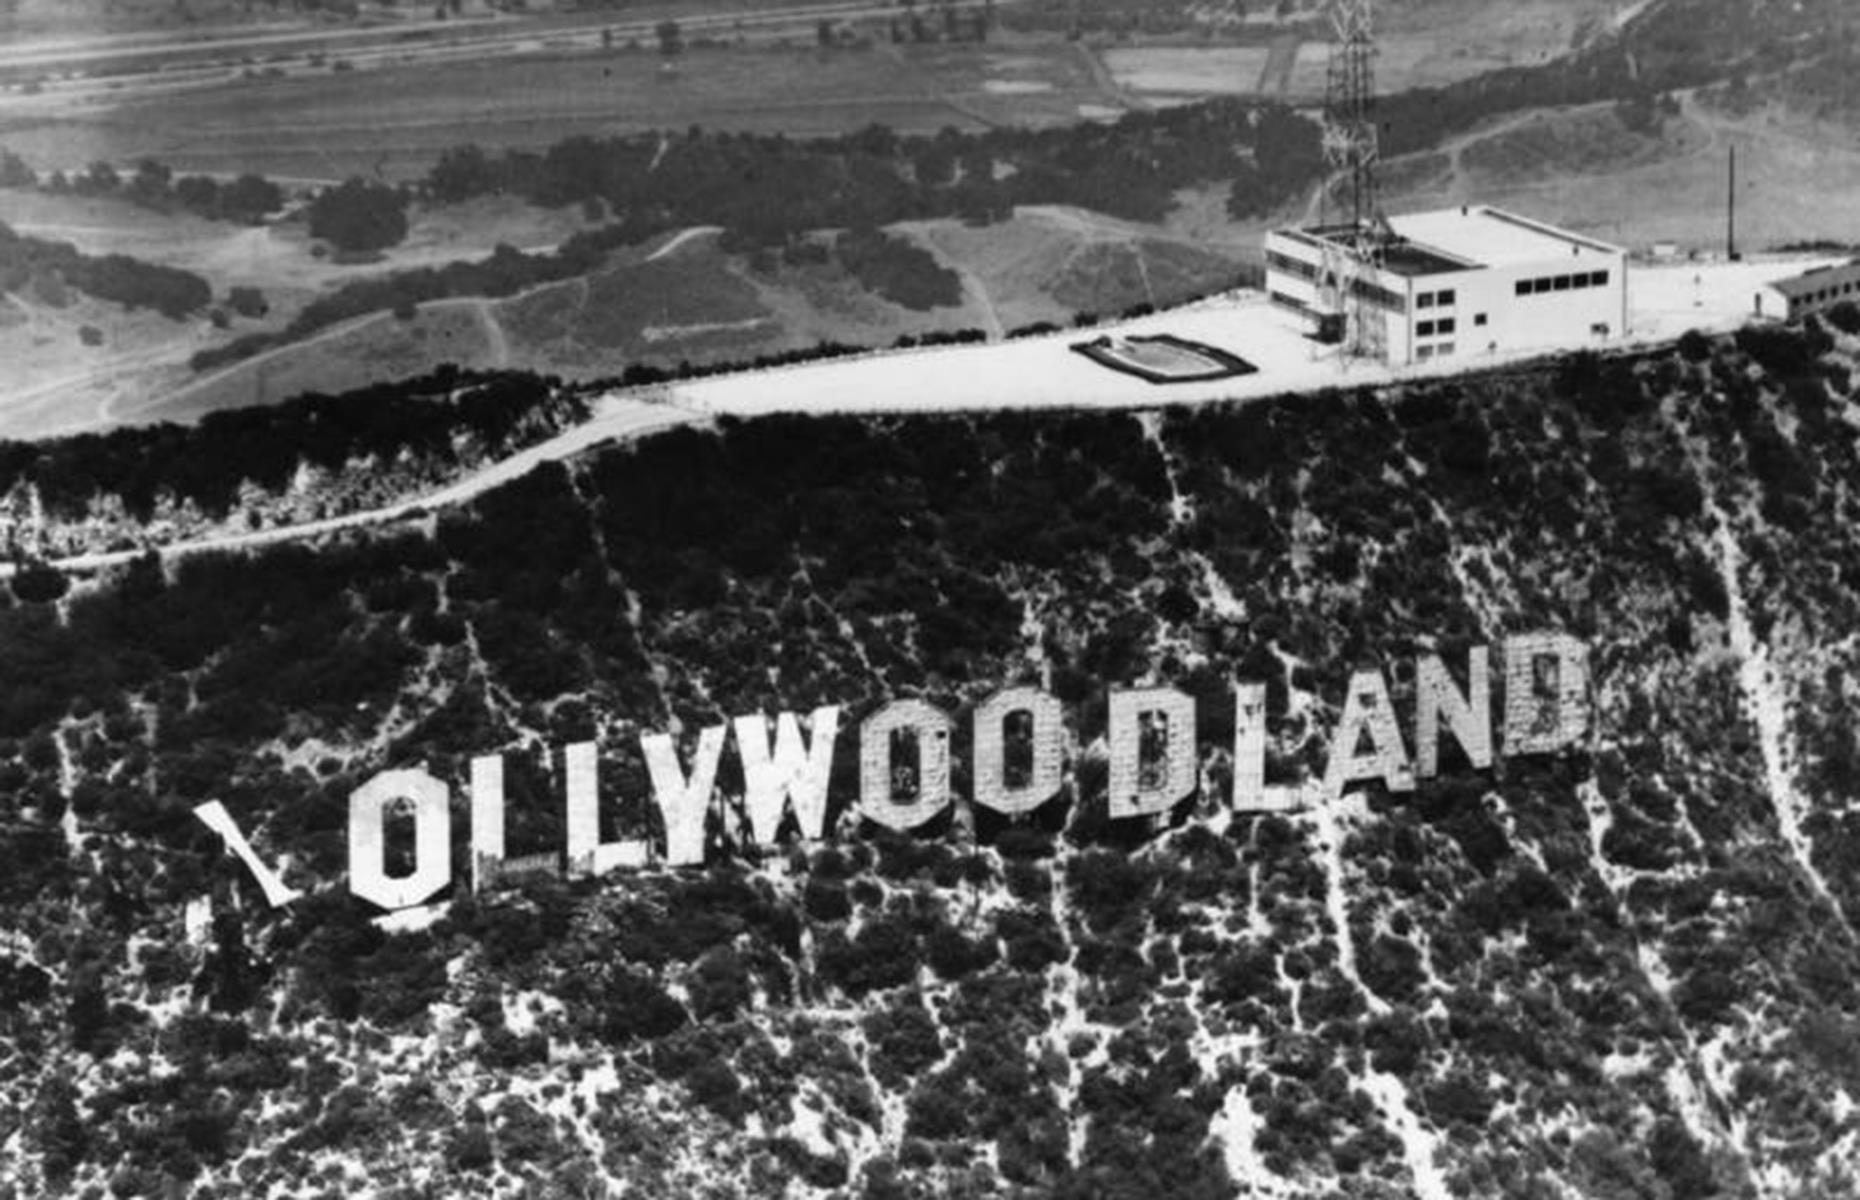 Woodruff and Shoults’ ‘Hollywoodland’ sign (1923)